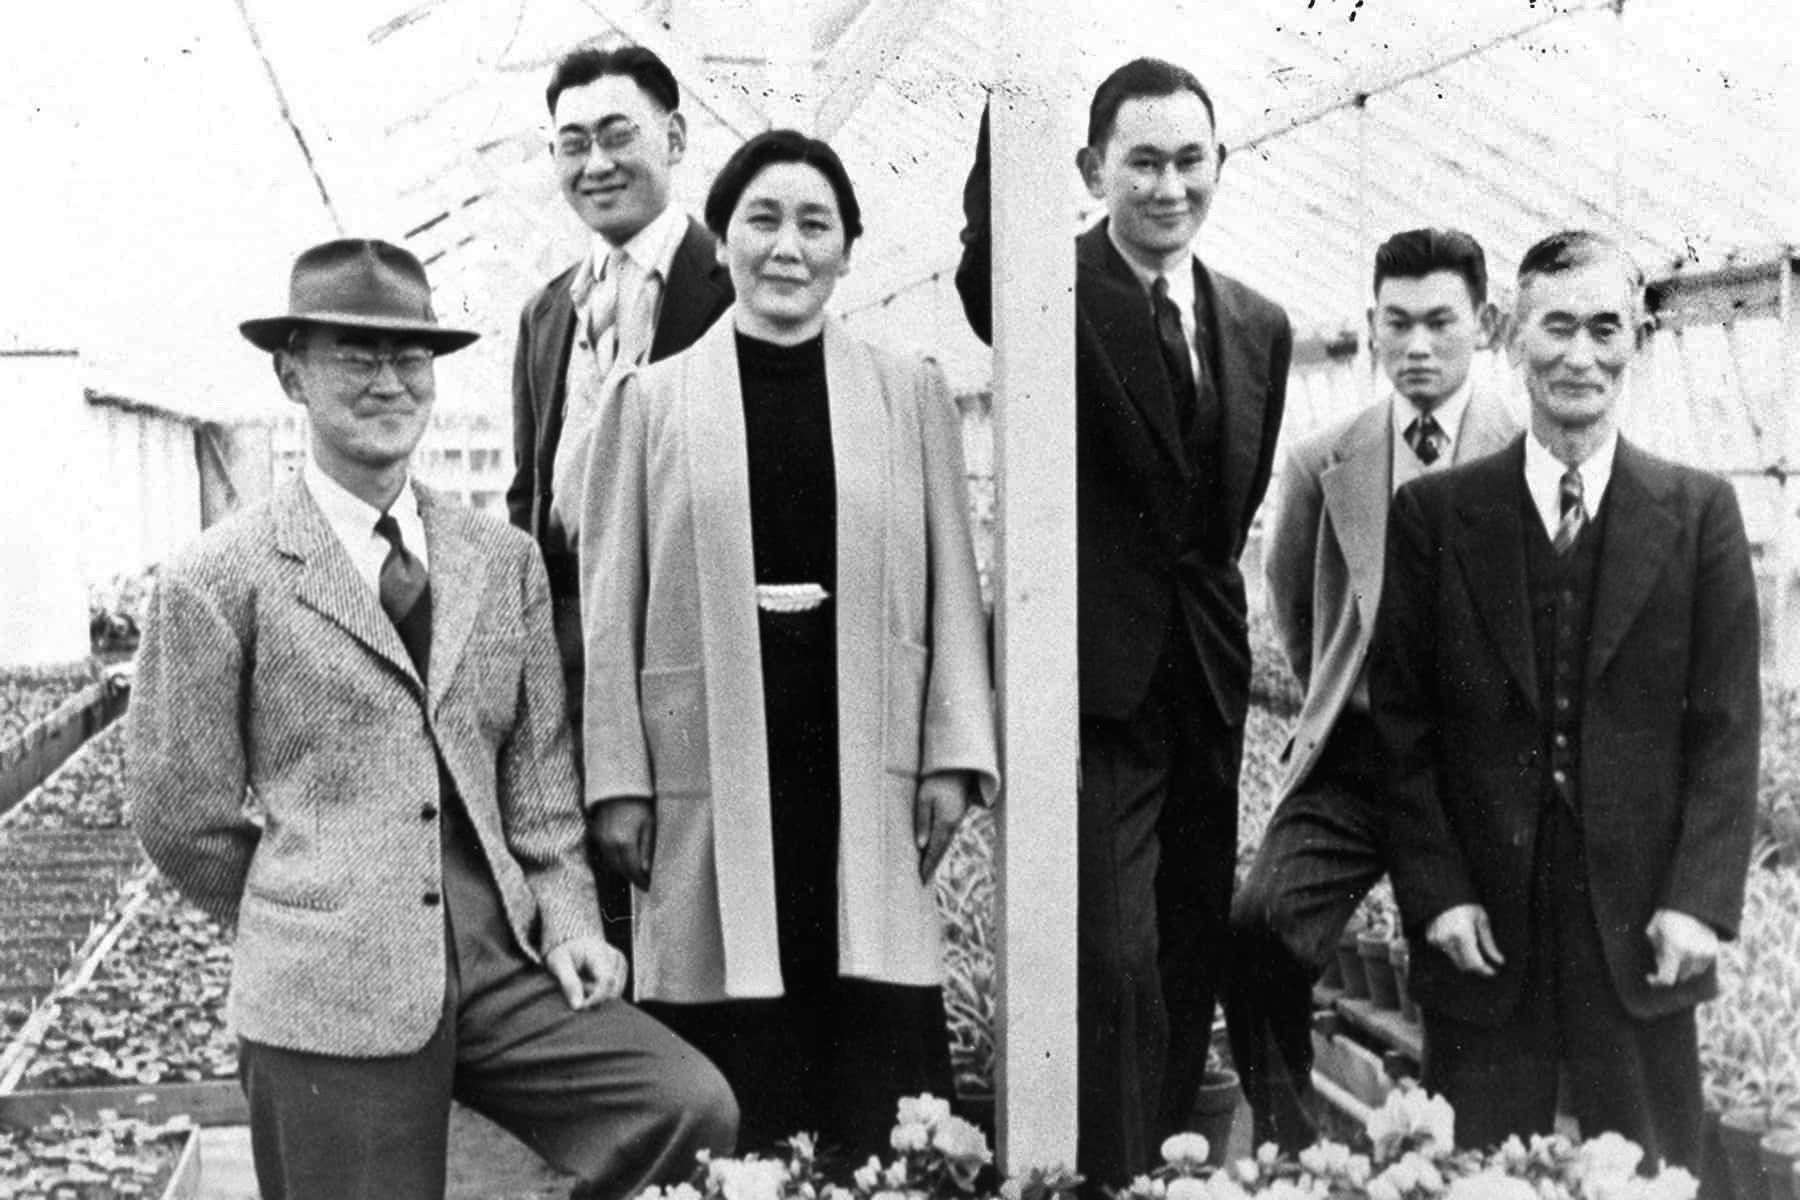 A young Fred Korematsu, second from right (in back), stands with members of his family in the 1940s. Korematsu was caught up in the execution of an executive order mandating the resettlement of Japanese-Americans due to fears of sabotage and subversion.